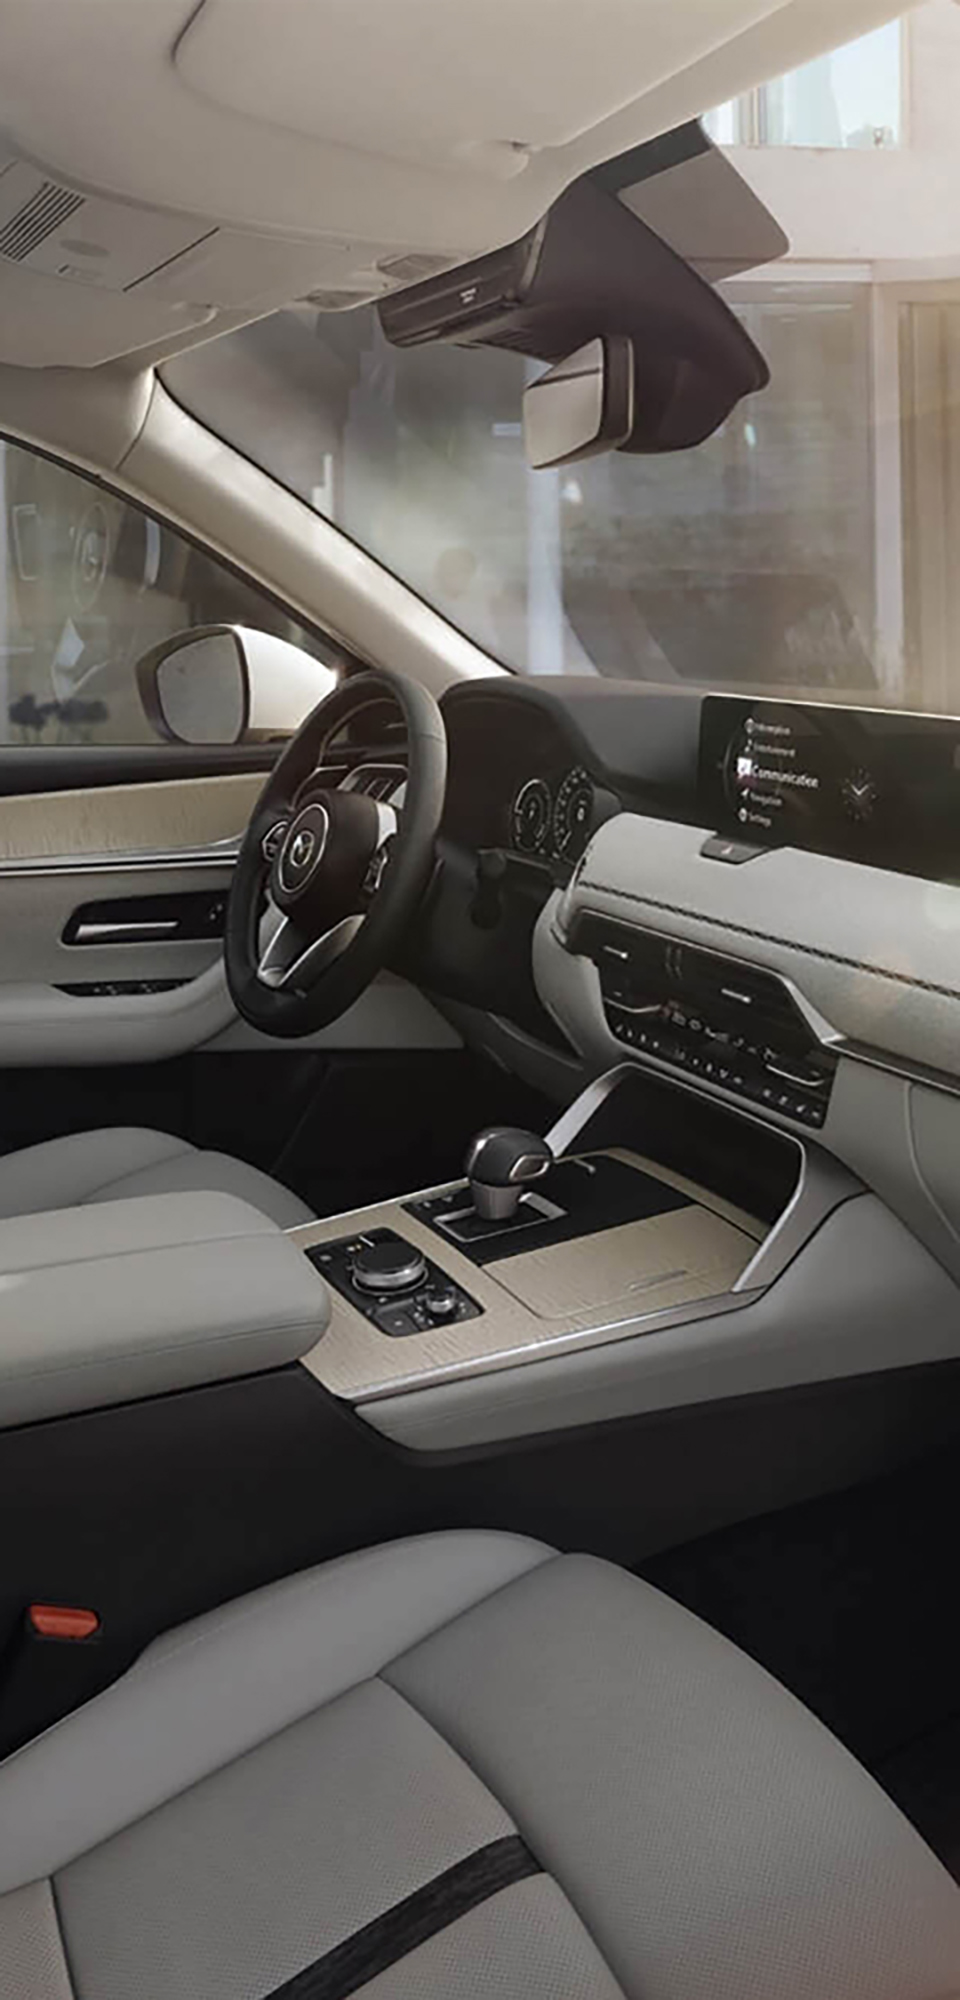 The roomy interior of the all-new Mazda CX-60 Plug-In Hybrid SUV featuring Japanese craftsmanship.